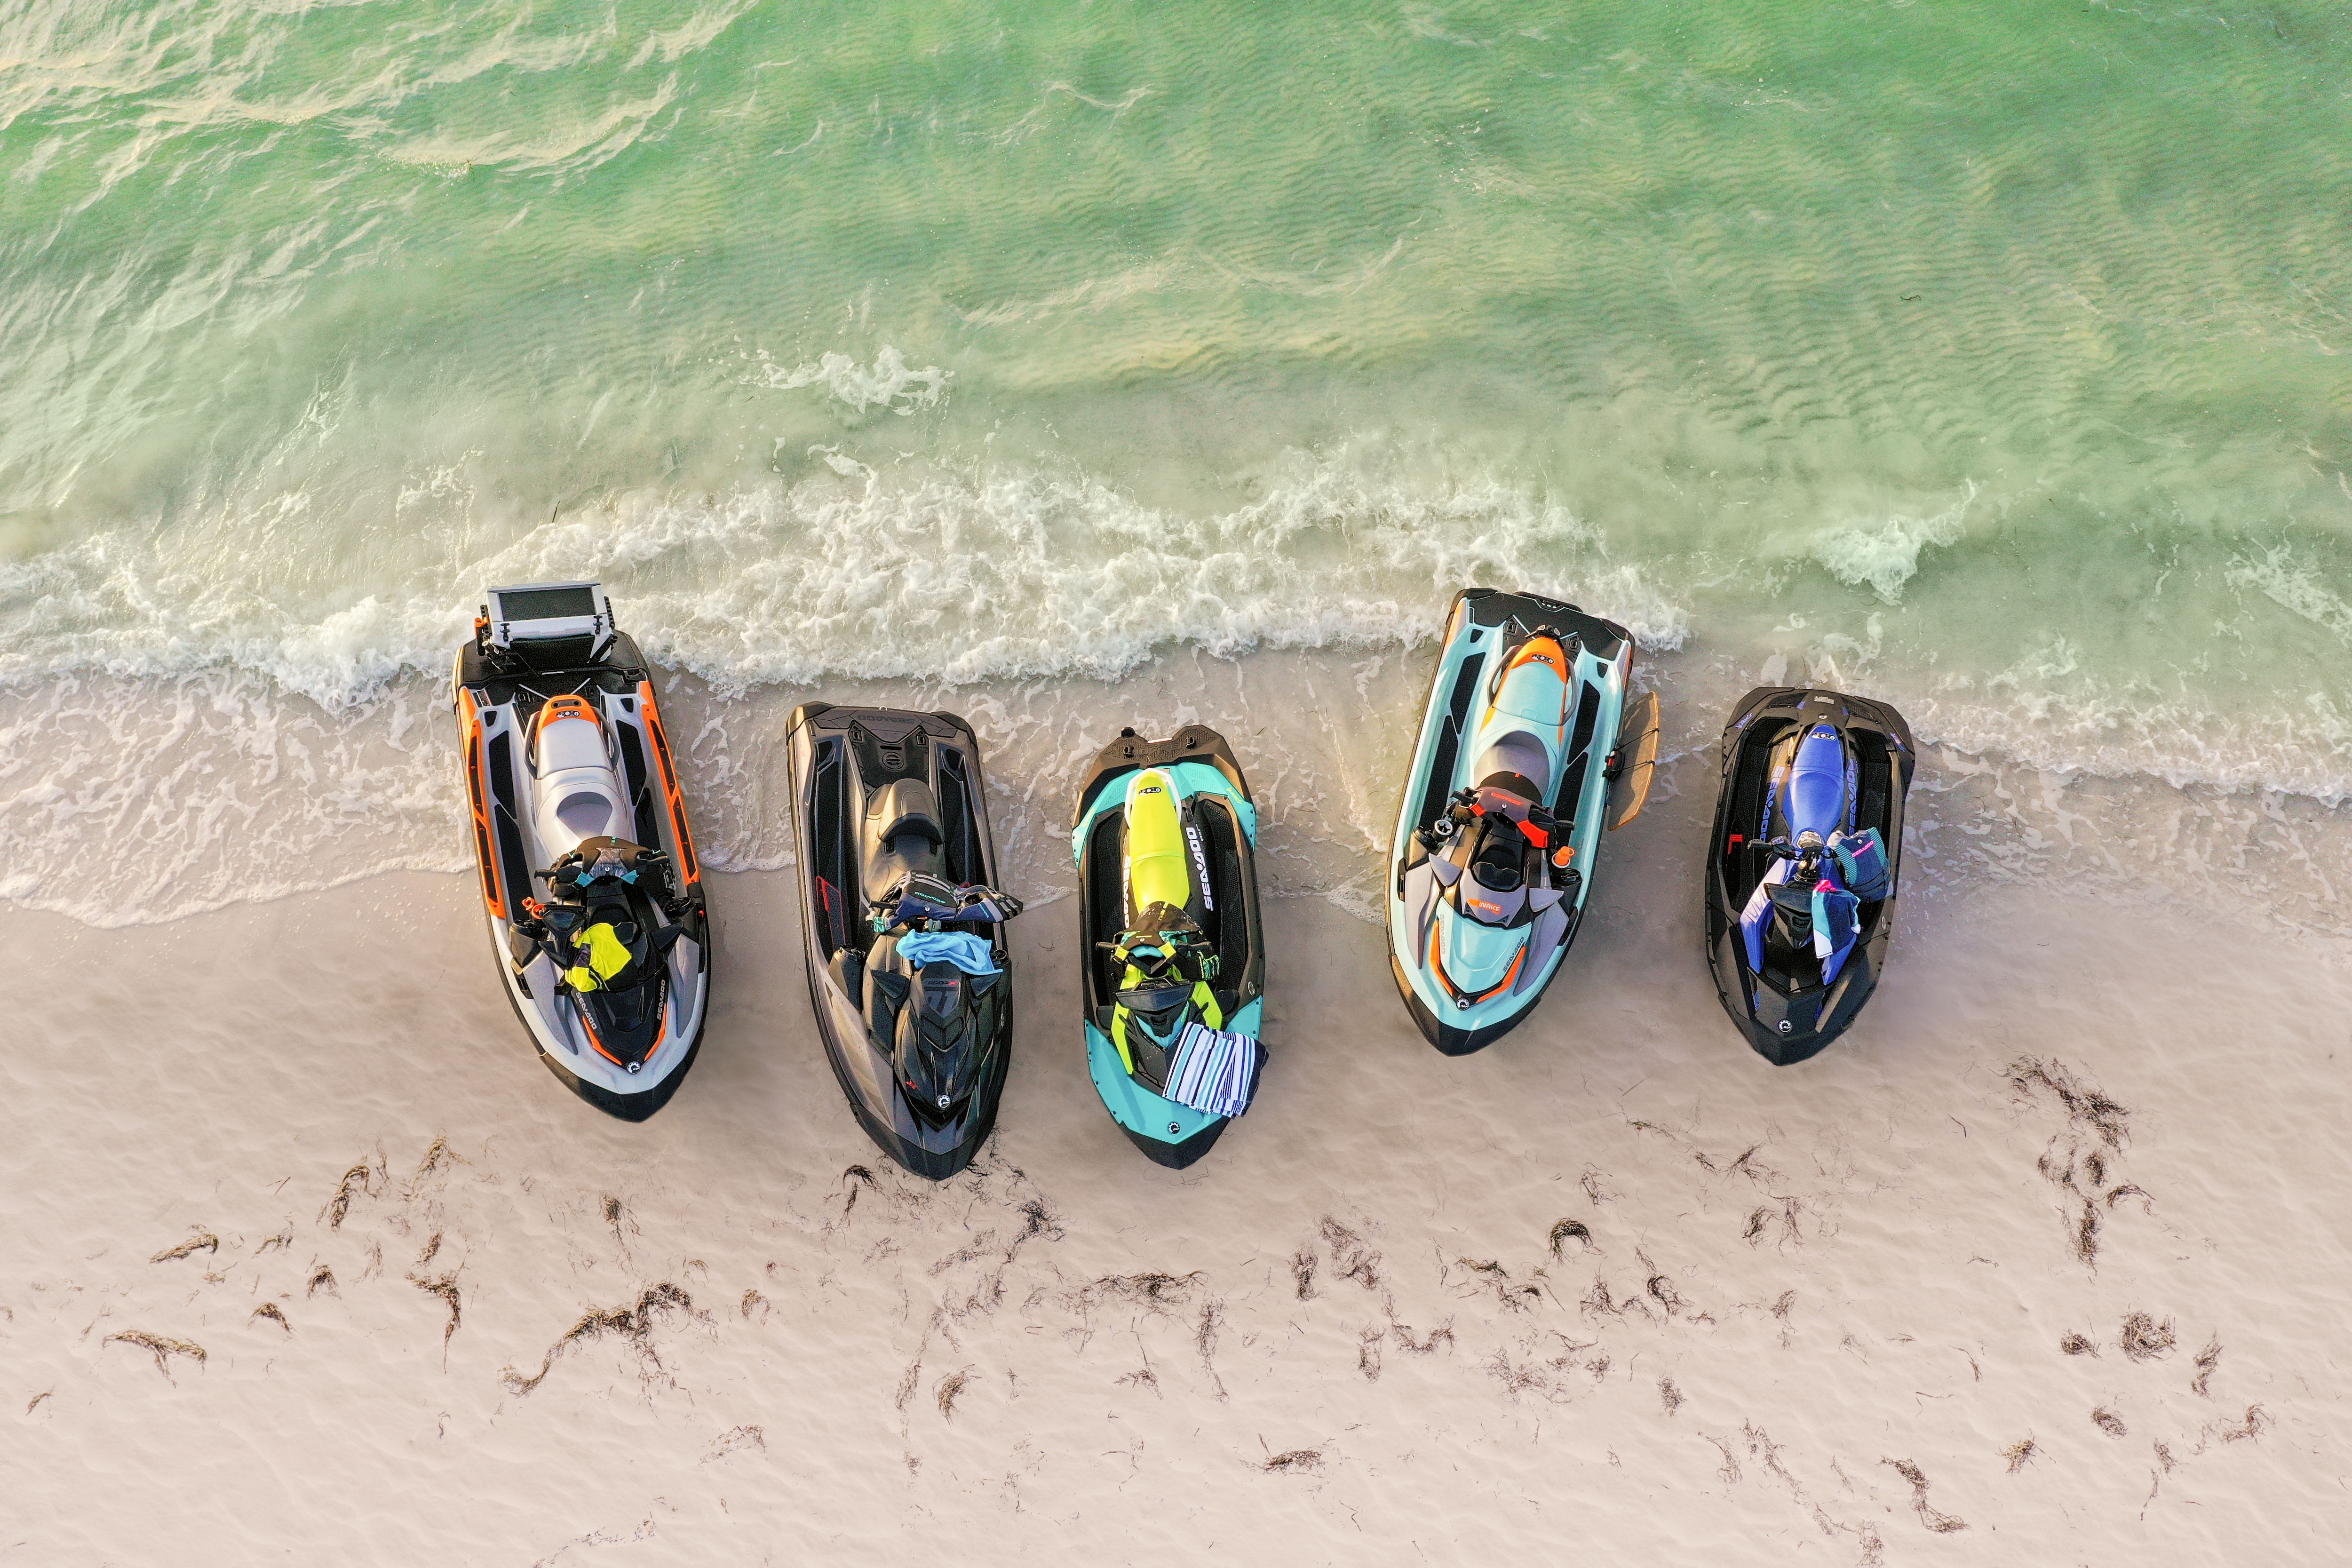 Sea-Doo vehicles lined up on the shore